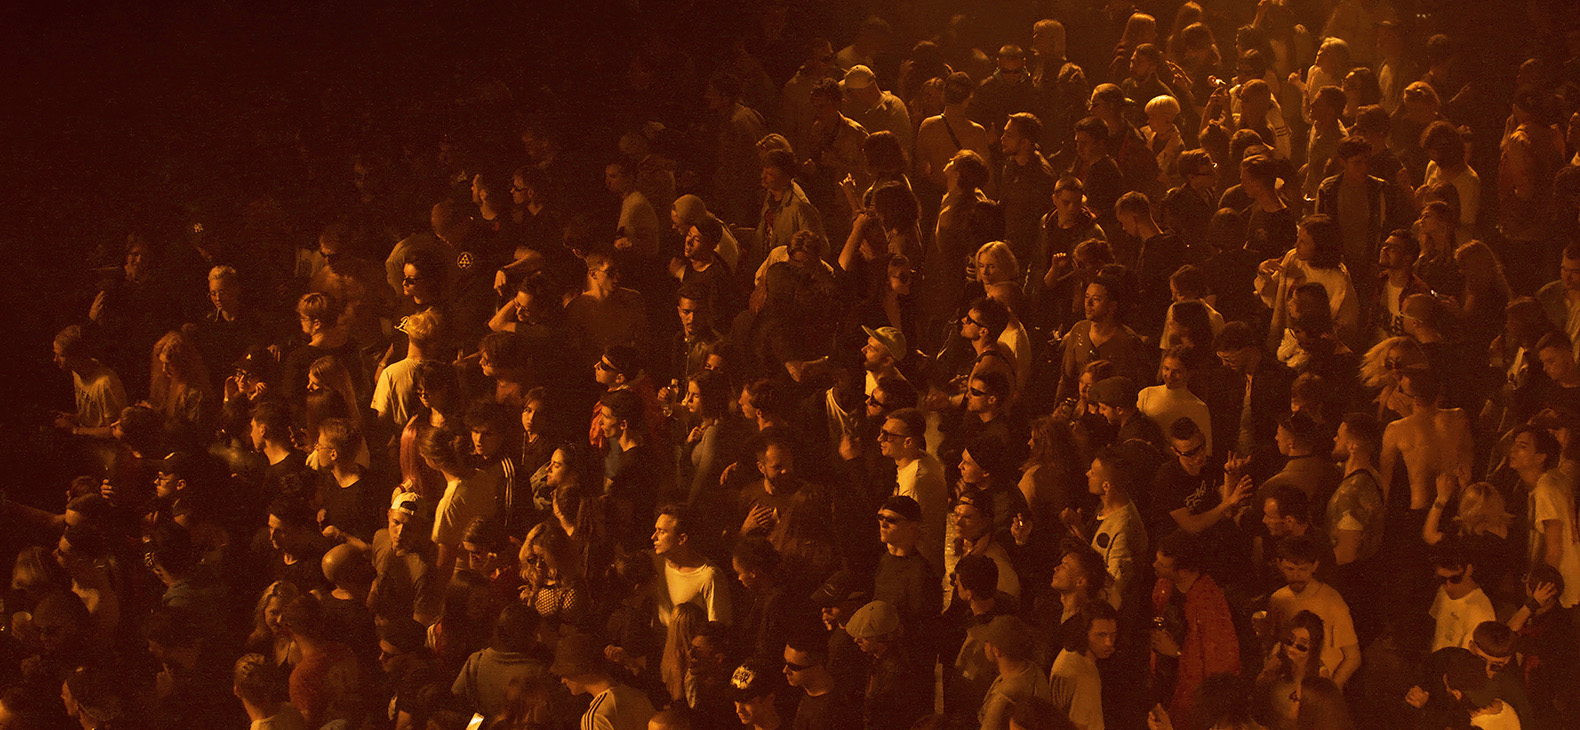 Forced Screenings: Vernissage; image: still from the video «Dedicated to the Youth of the World II» - crowd in a concert shot from above, dark atmosphere in red-yellow